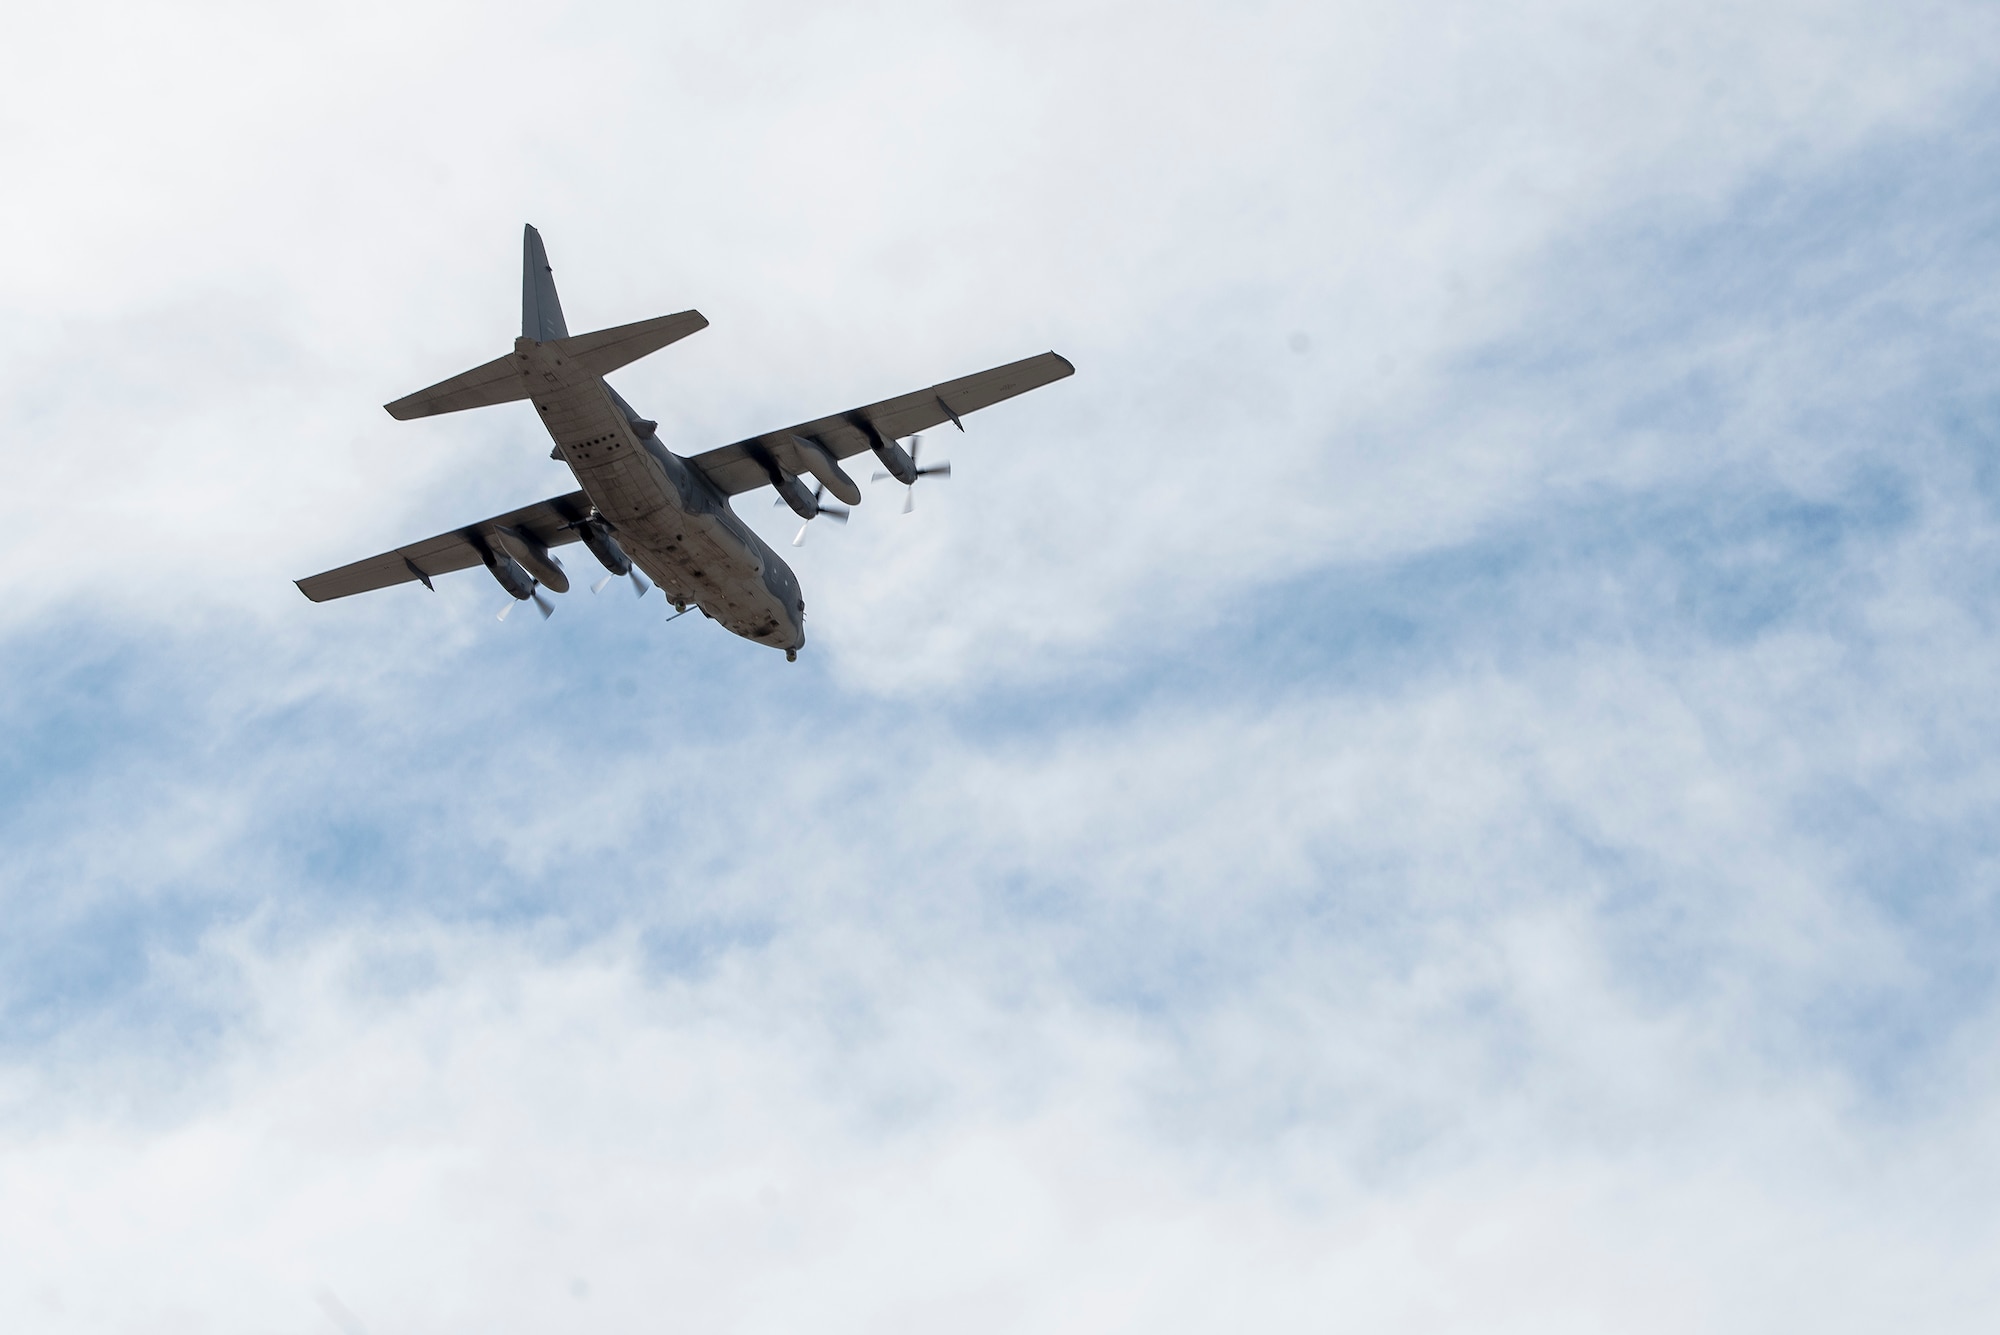 An AC-130W aircraft, piloted by members of the 551st Special Operations Squadron, flies over Cannon Air Force Base, N.M., April 29, 2021. The flight was flown to commemorate the last training flight of the 551 SOS. (U.S. Air Force photo by Senior Airman Vernon R. Walter III)